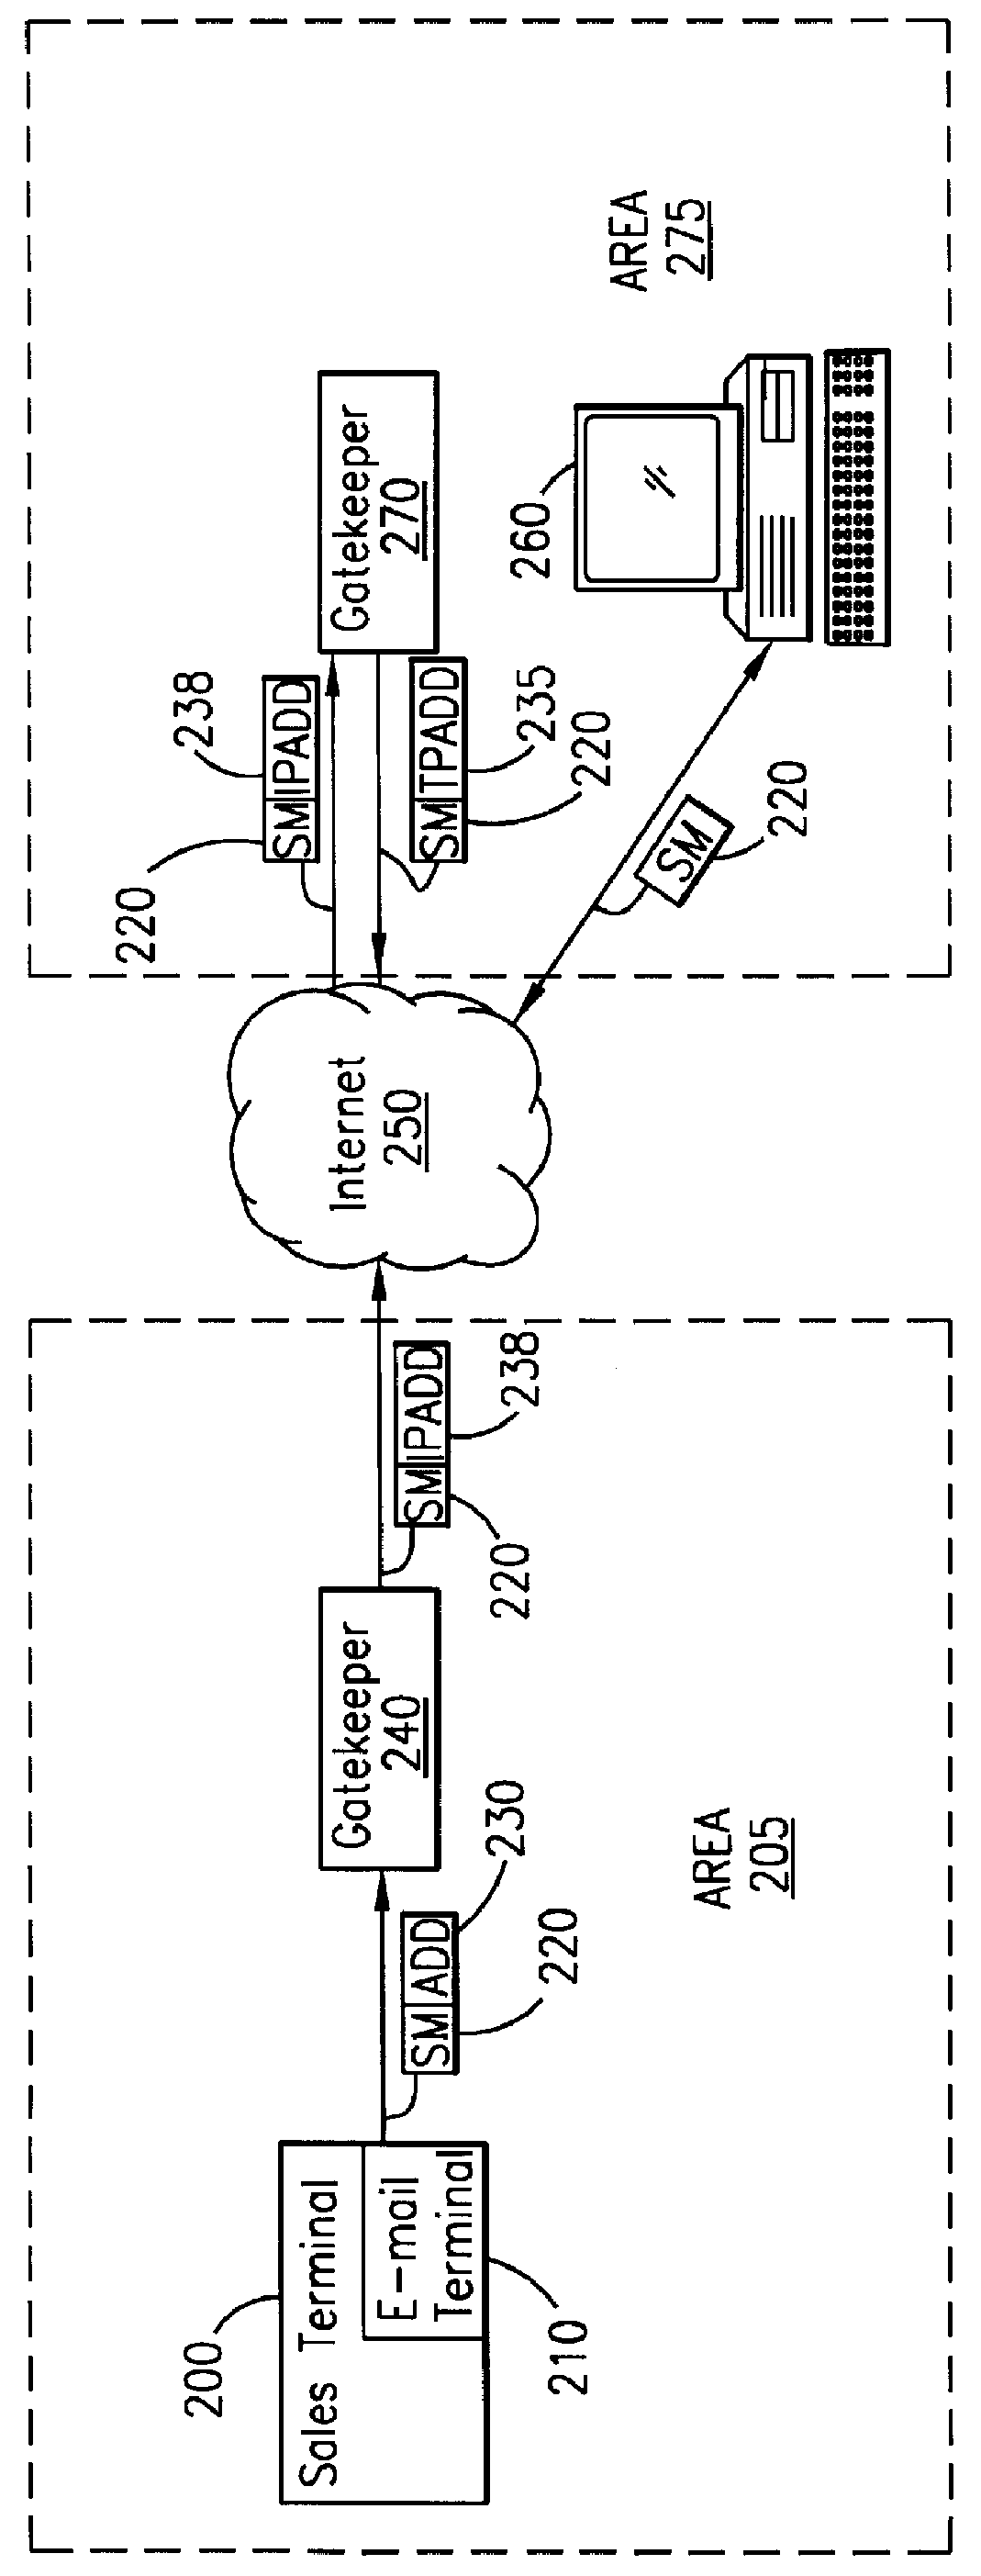 System and method for sending a short message containing purchase information to a destination terminal